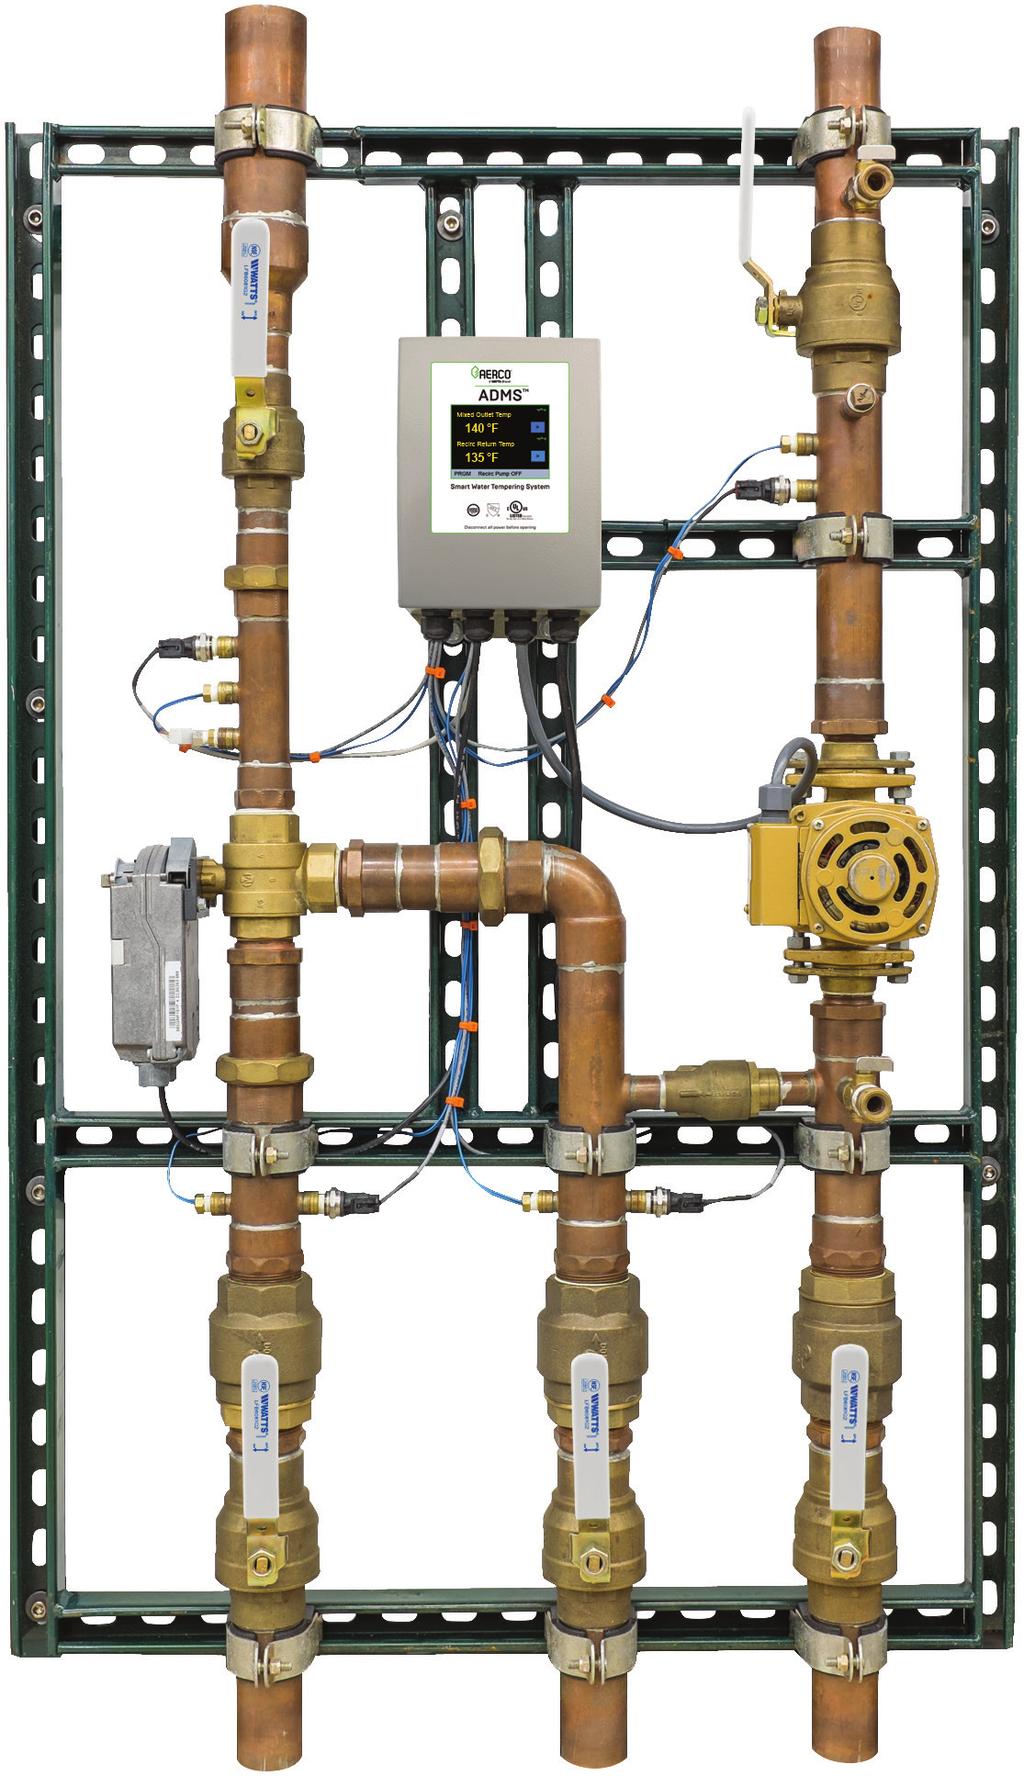 AERCO Digital Mixing Station Mixed Water Outlet Return High-speed actuator provides temperature stabilization within ±2ºF in accordance with ASSE 1017.